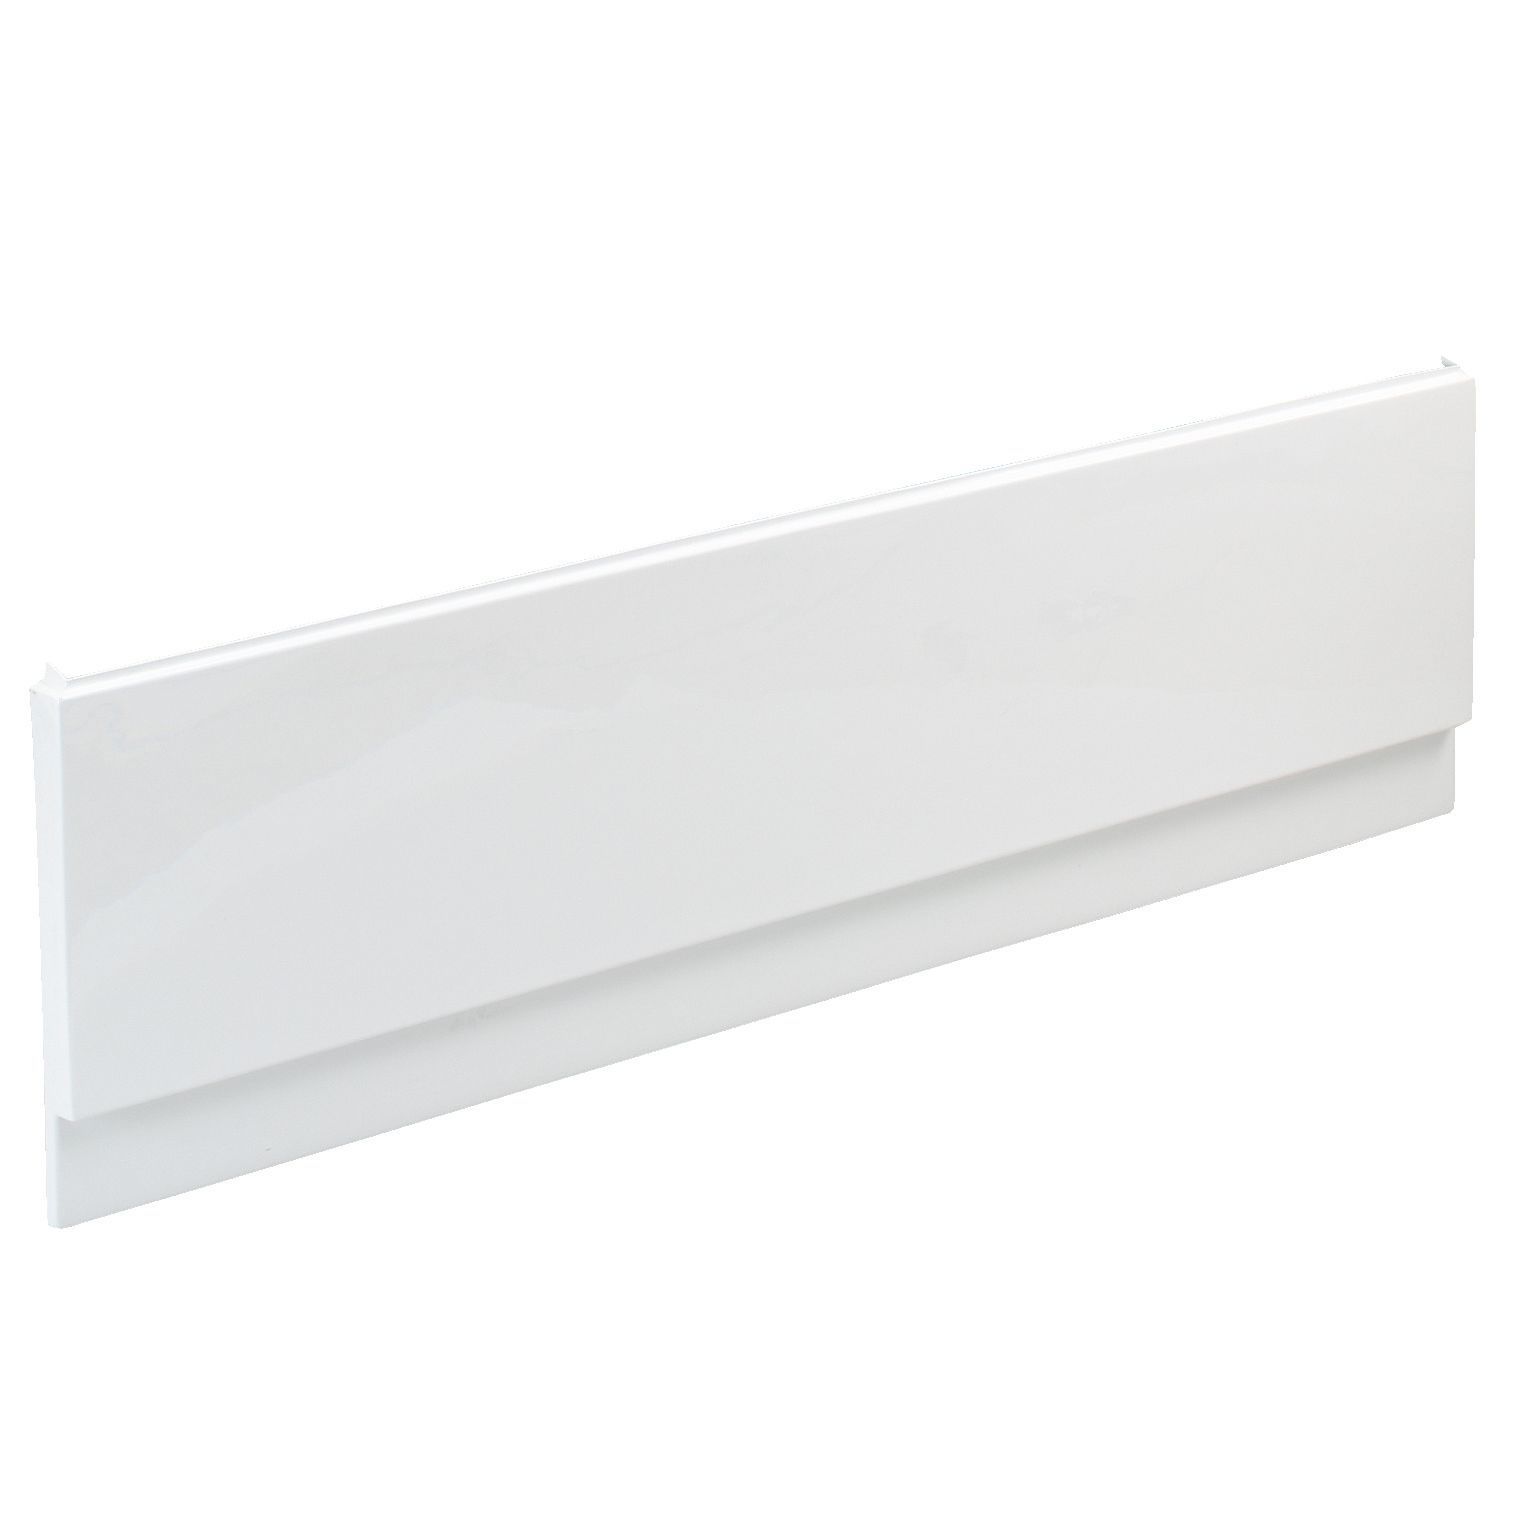 Cooke Lewis Shaftesbury White Front Bath Panel H 51cm W 150cm~03854860 03c?$MOB PREV$&$width=768&$height=768